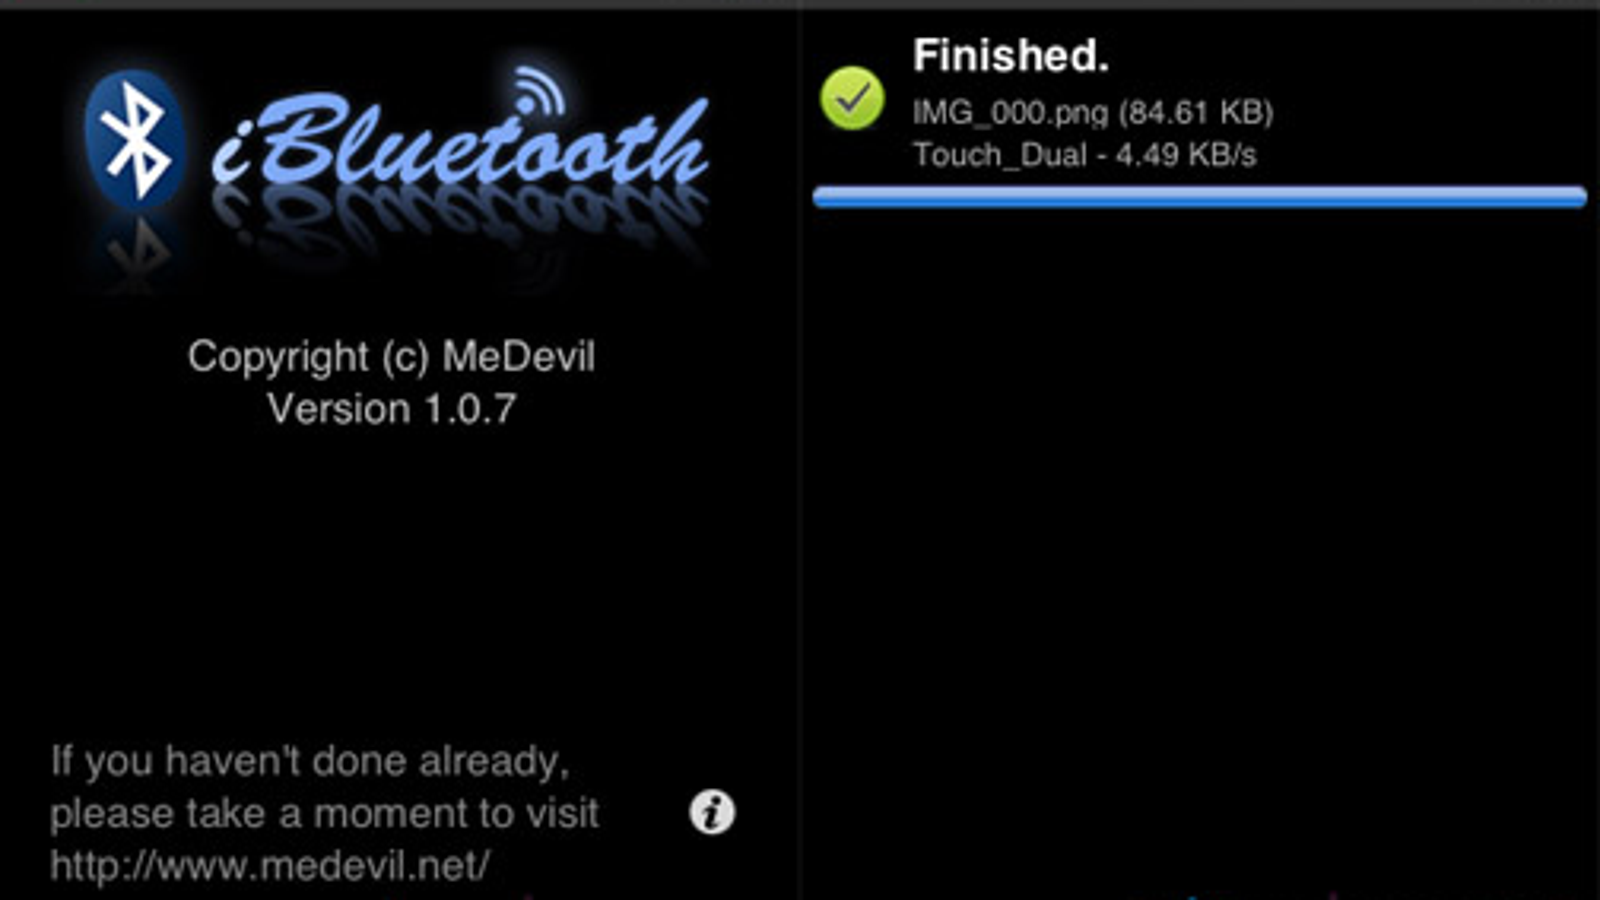 how to receive bluetooth files on iphone